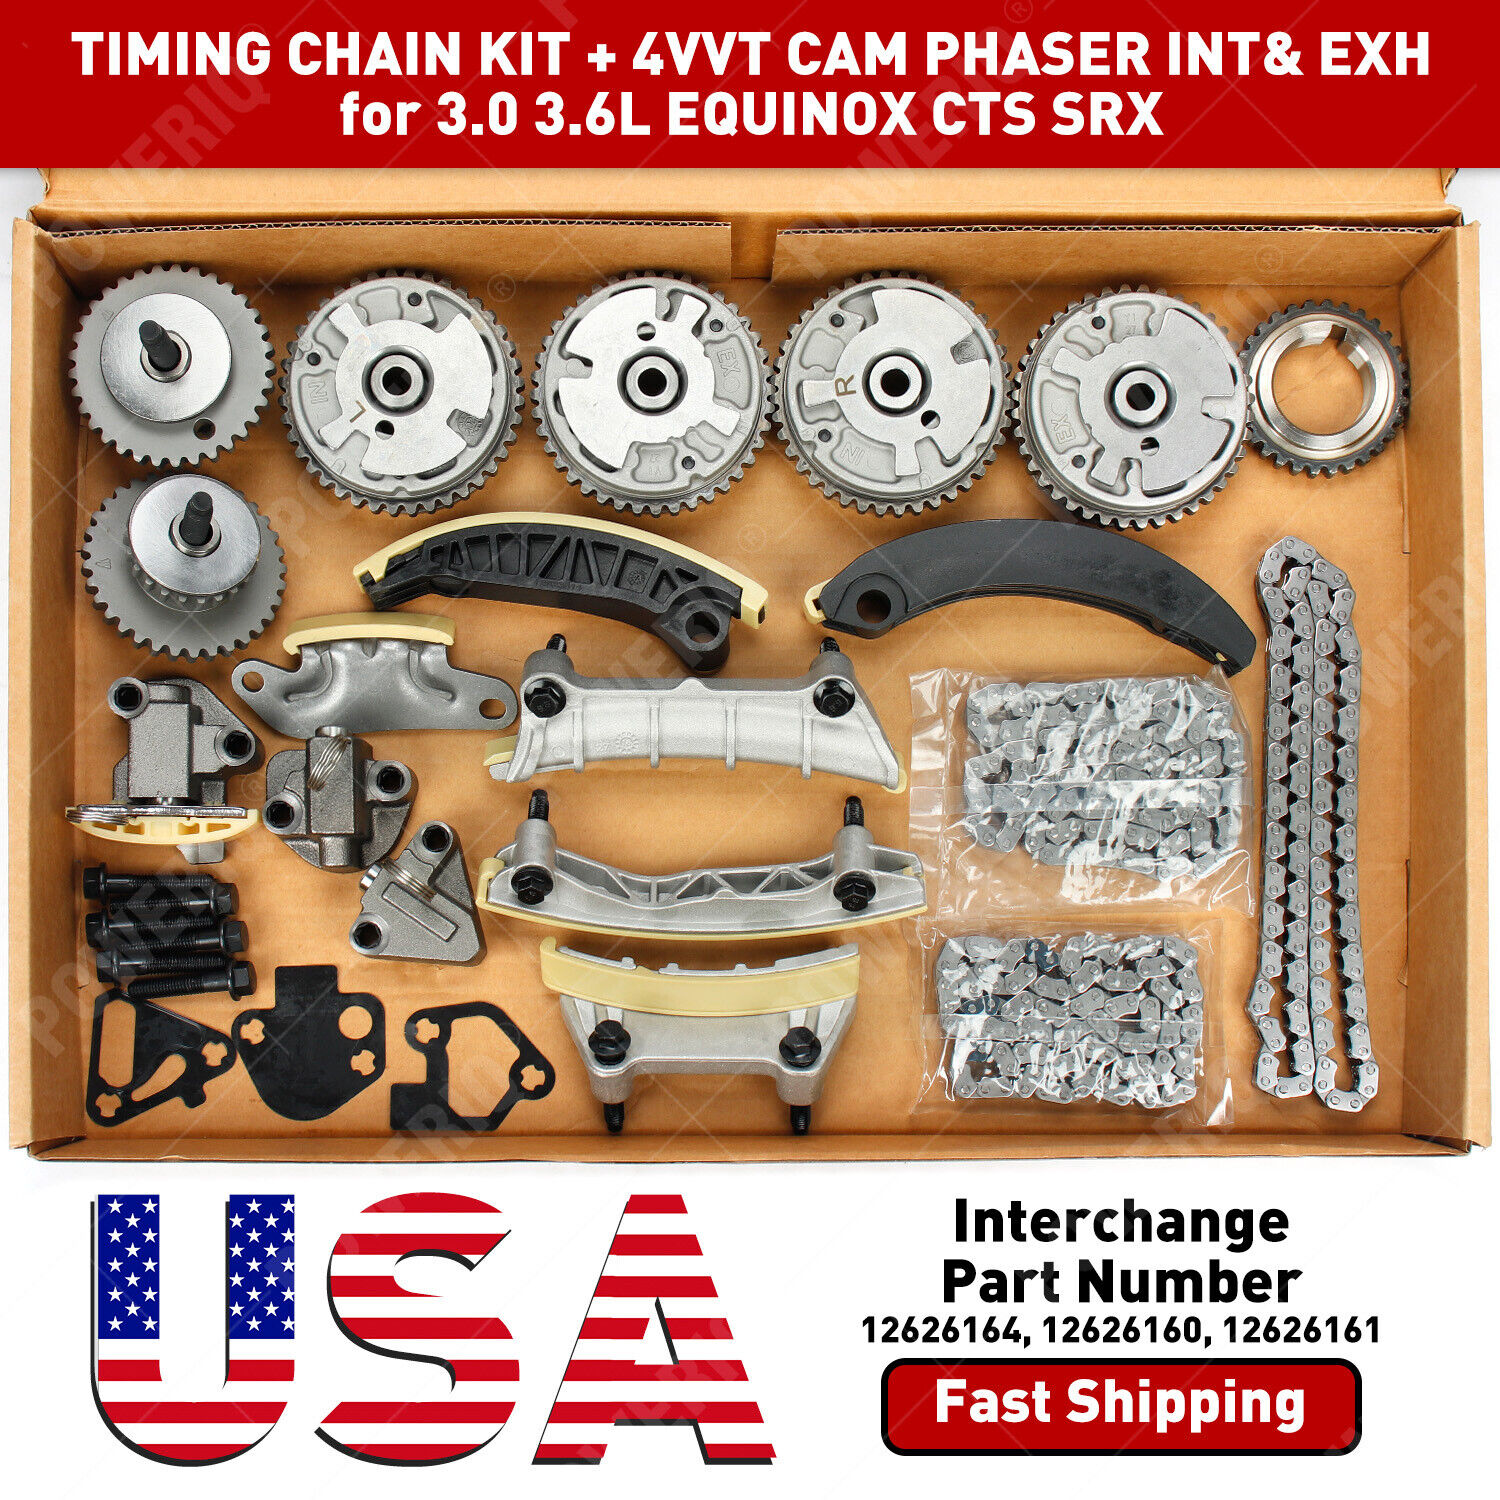 Complete Kit Timing Chain& 4VVT Cam Phaser Int& Exh For 3.0 3.6l Equinox CTS SRX